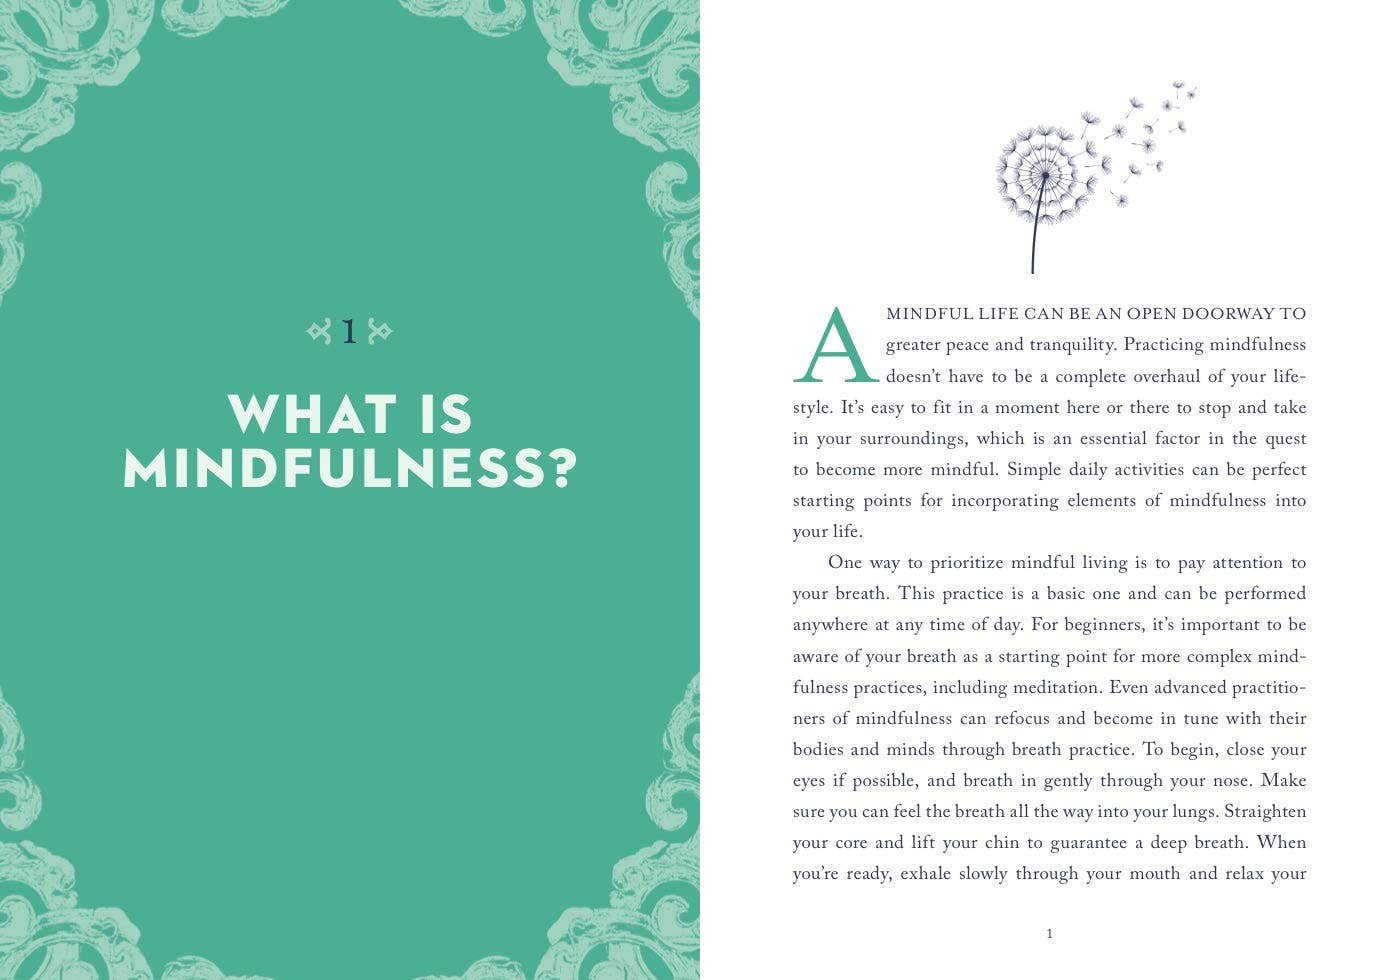 A Little Bit of Mindfulness by Amy Leigh Mercree